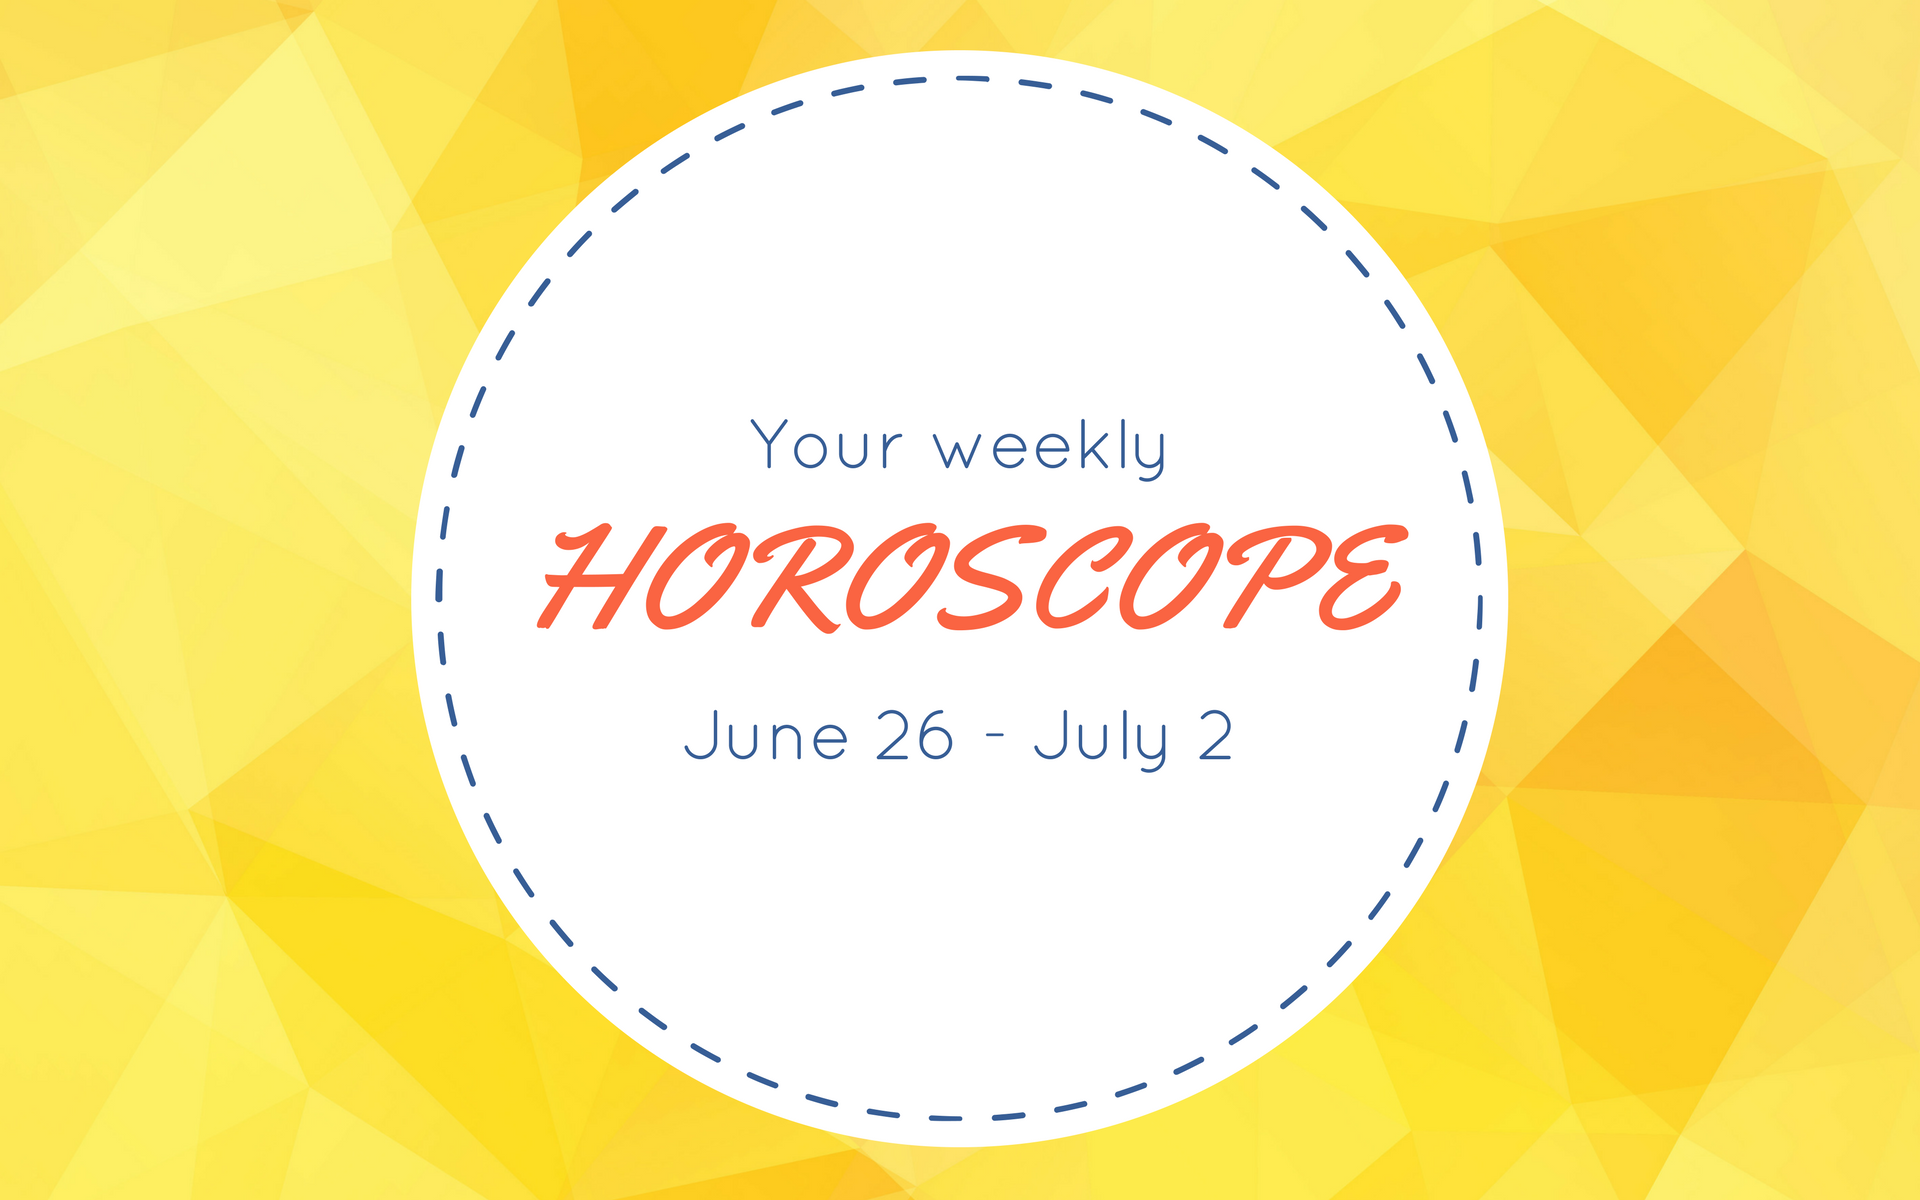 Your Weekly Horoscope: June 26 - July 2